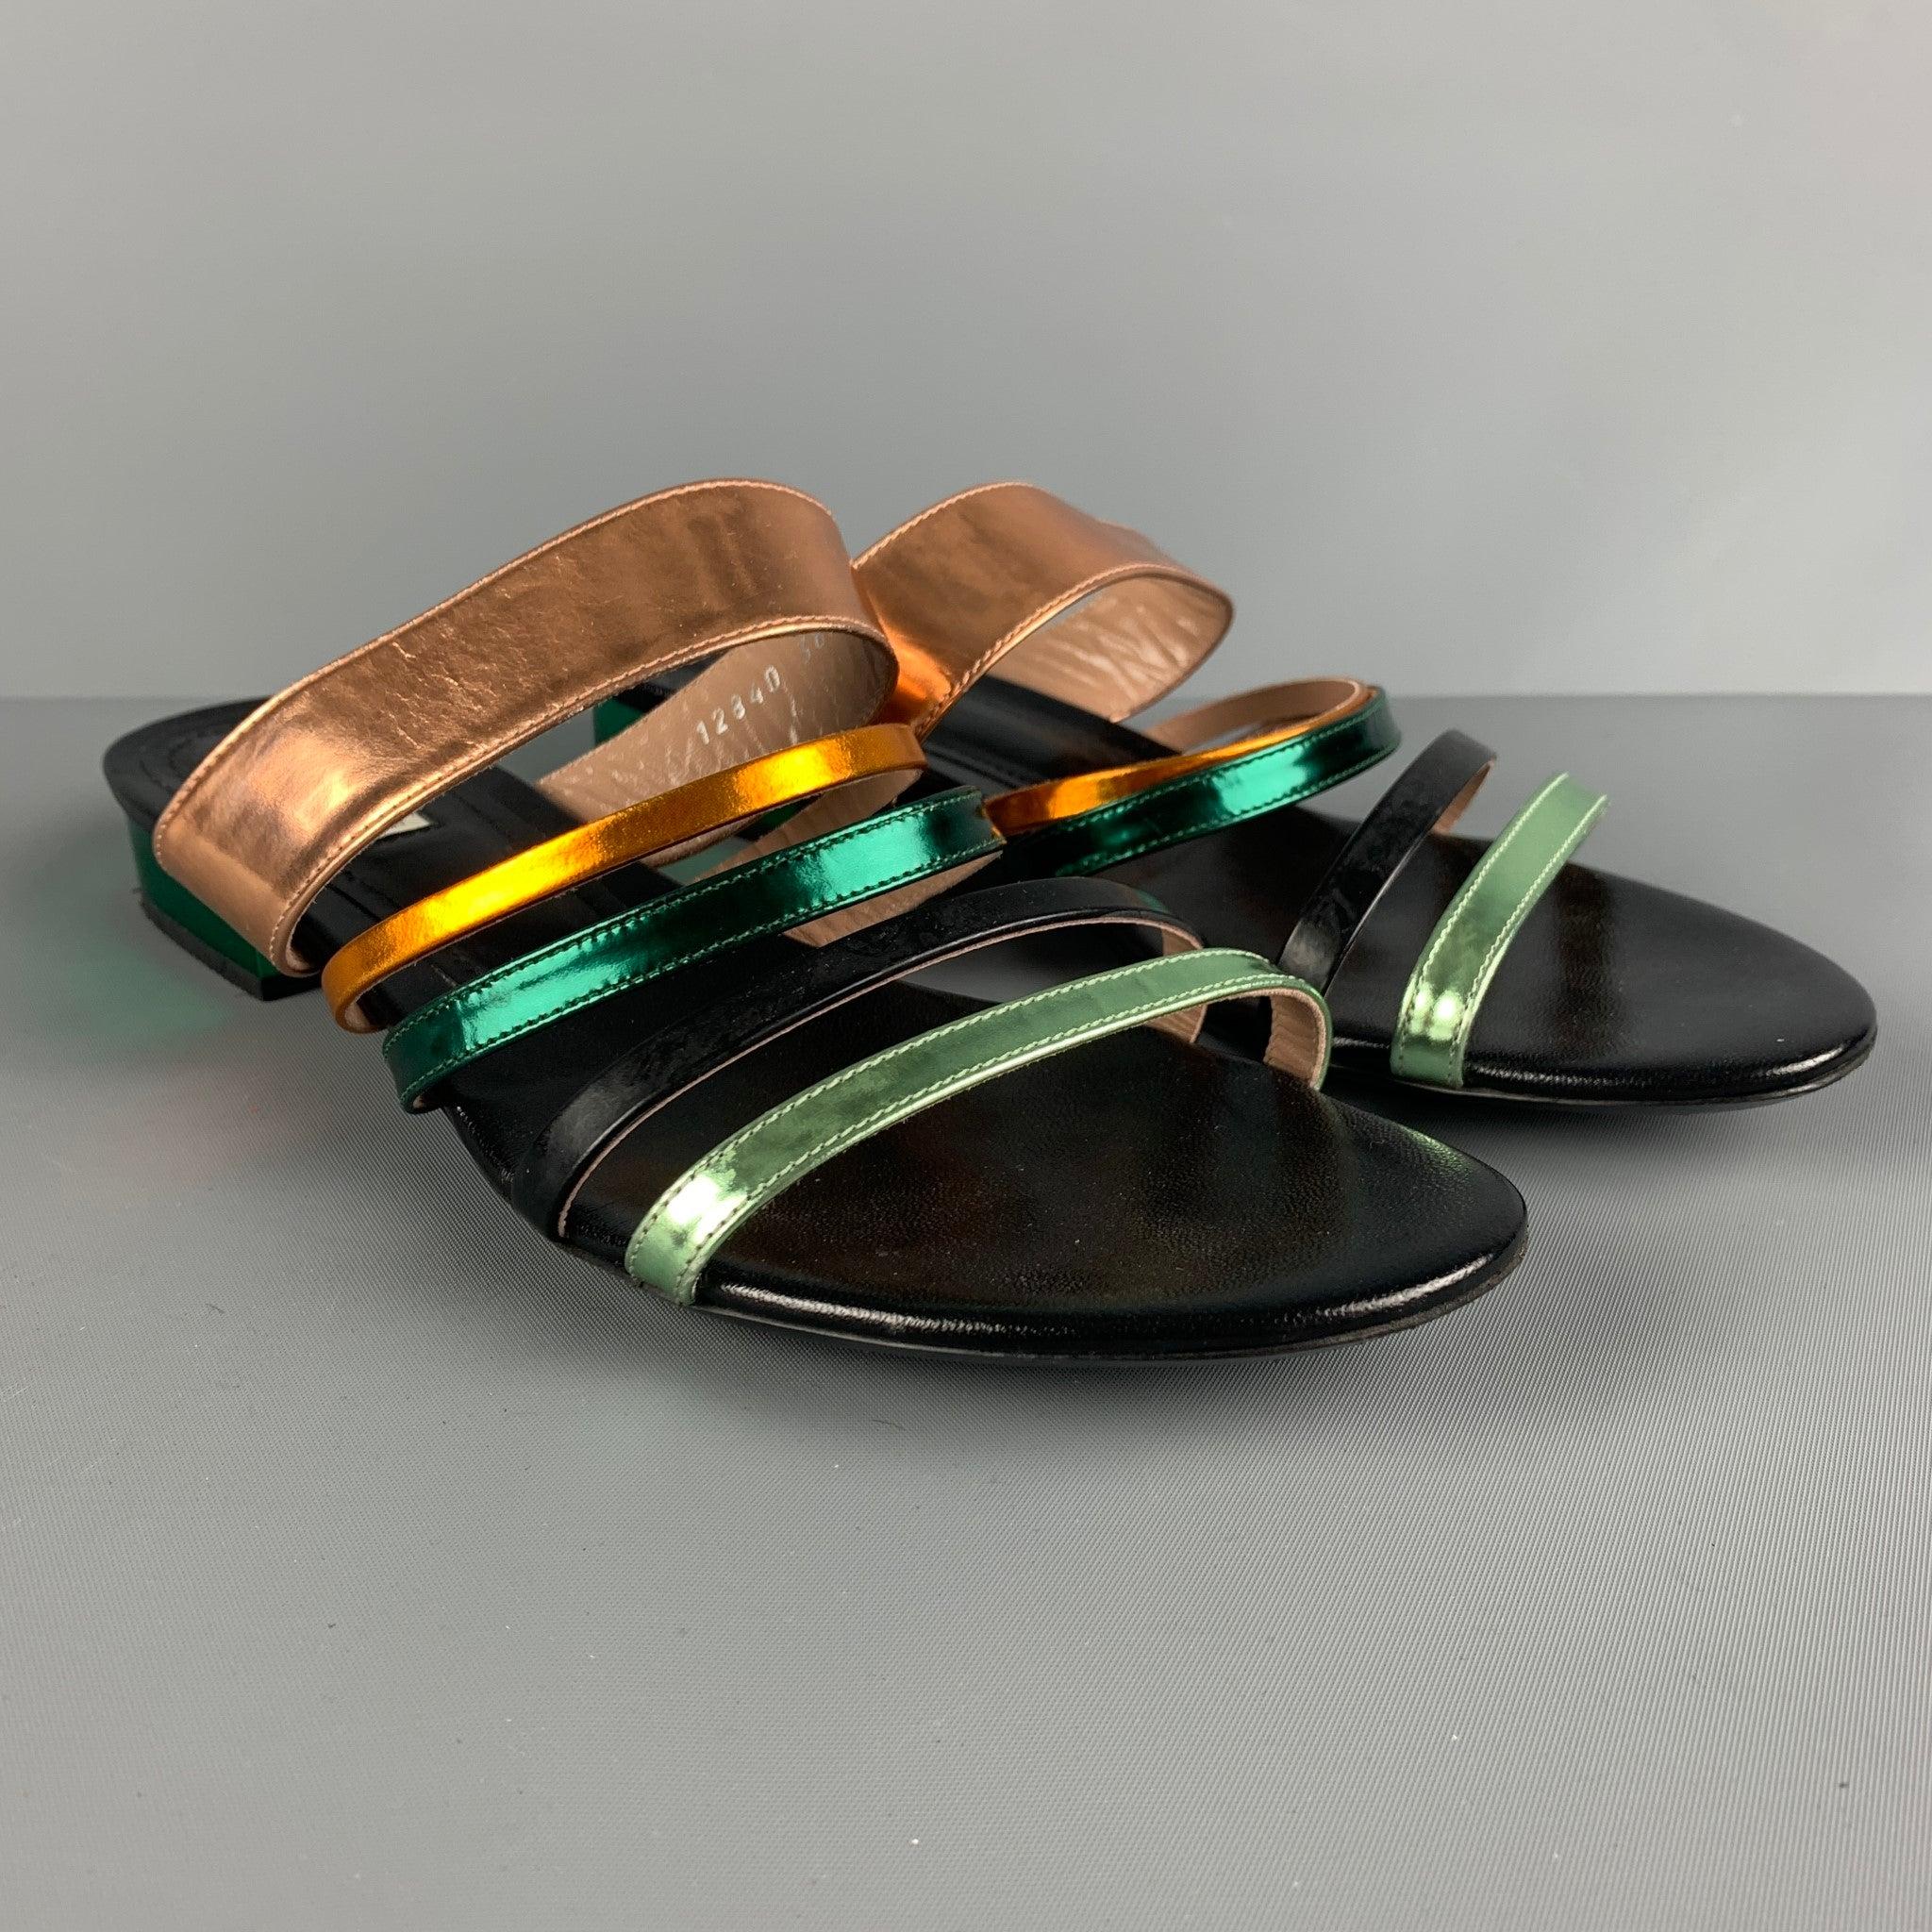 DRIES VAN NOTEN sandals comes in a black, green and gold patent leather featuring a strappy style and one inch metallic green heels. Made in Italy.Very Good Pre-Owned Condition. Moderate Wear. 

Marked:   38 1/2Heel: 1 inches  
  
  
 
Reference: